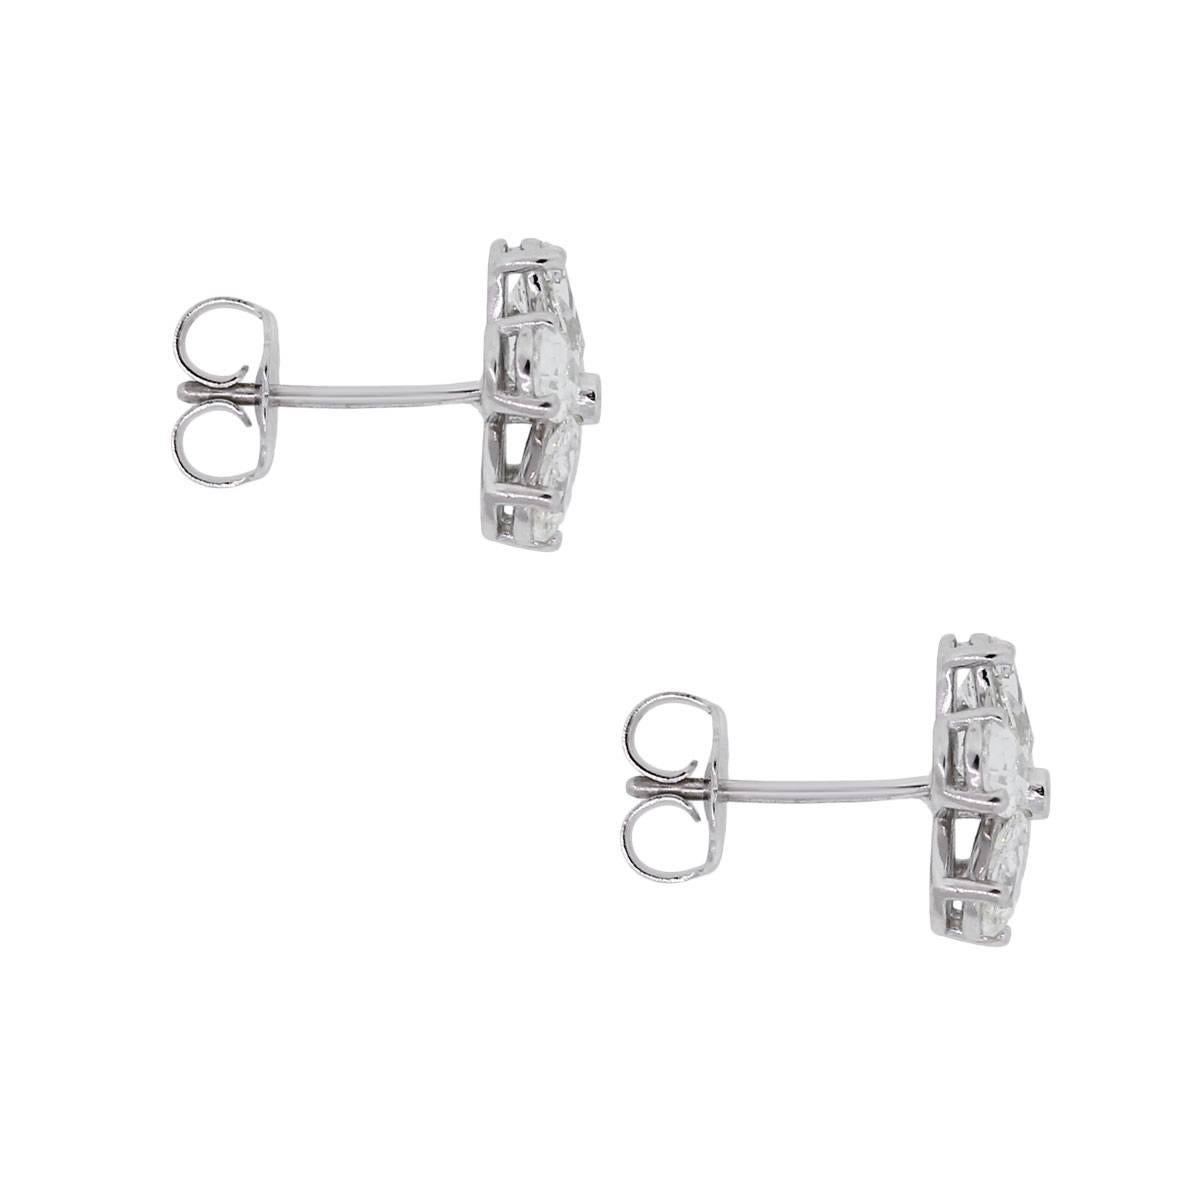 Material: 14k white gold
Diamond Details: Approximately 1.90ctw of pear shape and round brilliant diamonds. Diamonds are G/H in color and SI in clarity
Measurements: 0.58″ x 0.40″ x 0.40″
Earring Backs 	Post friction
Total Weight: 2.2g